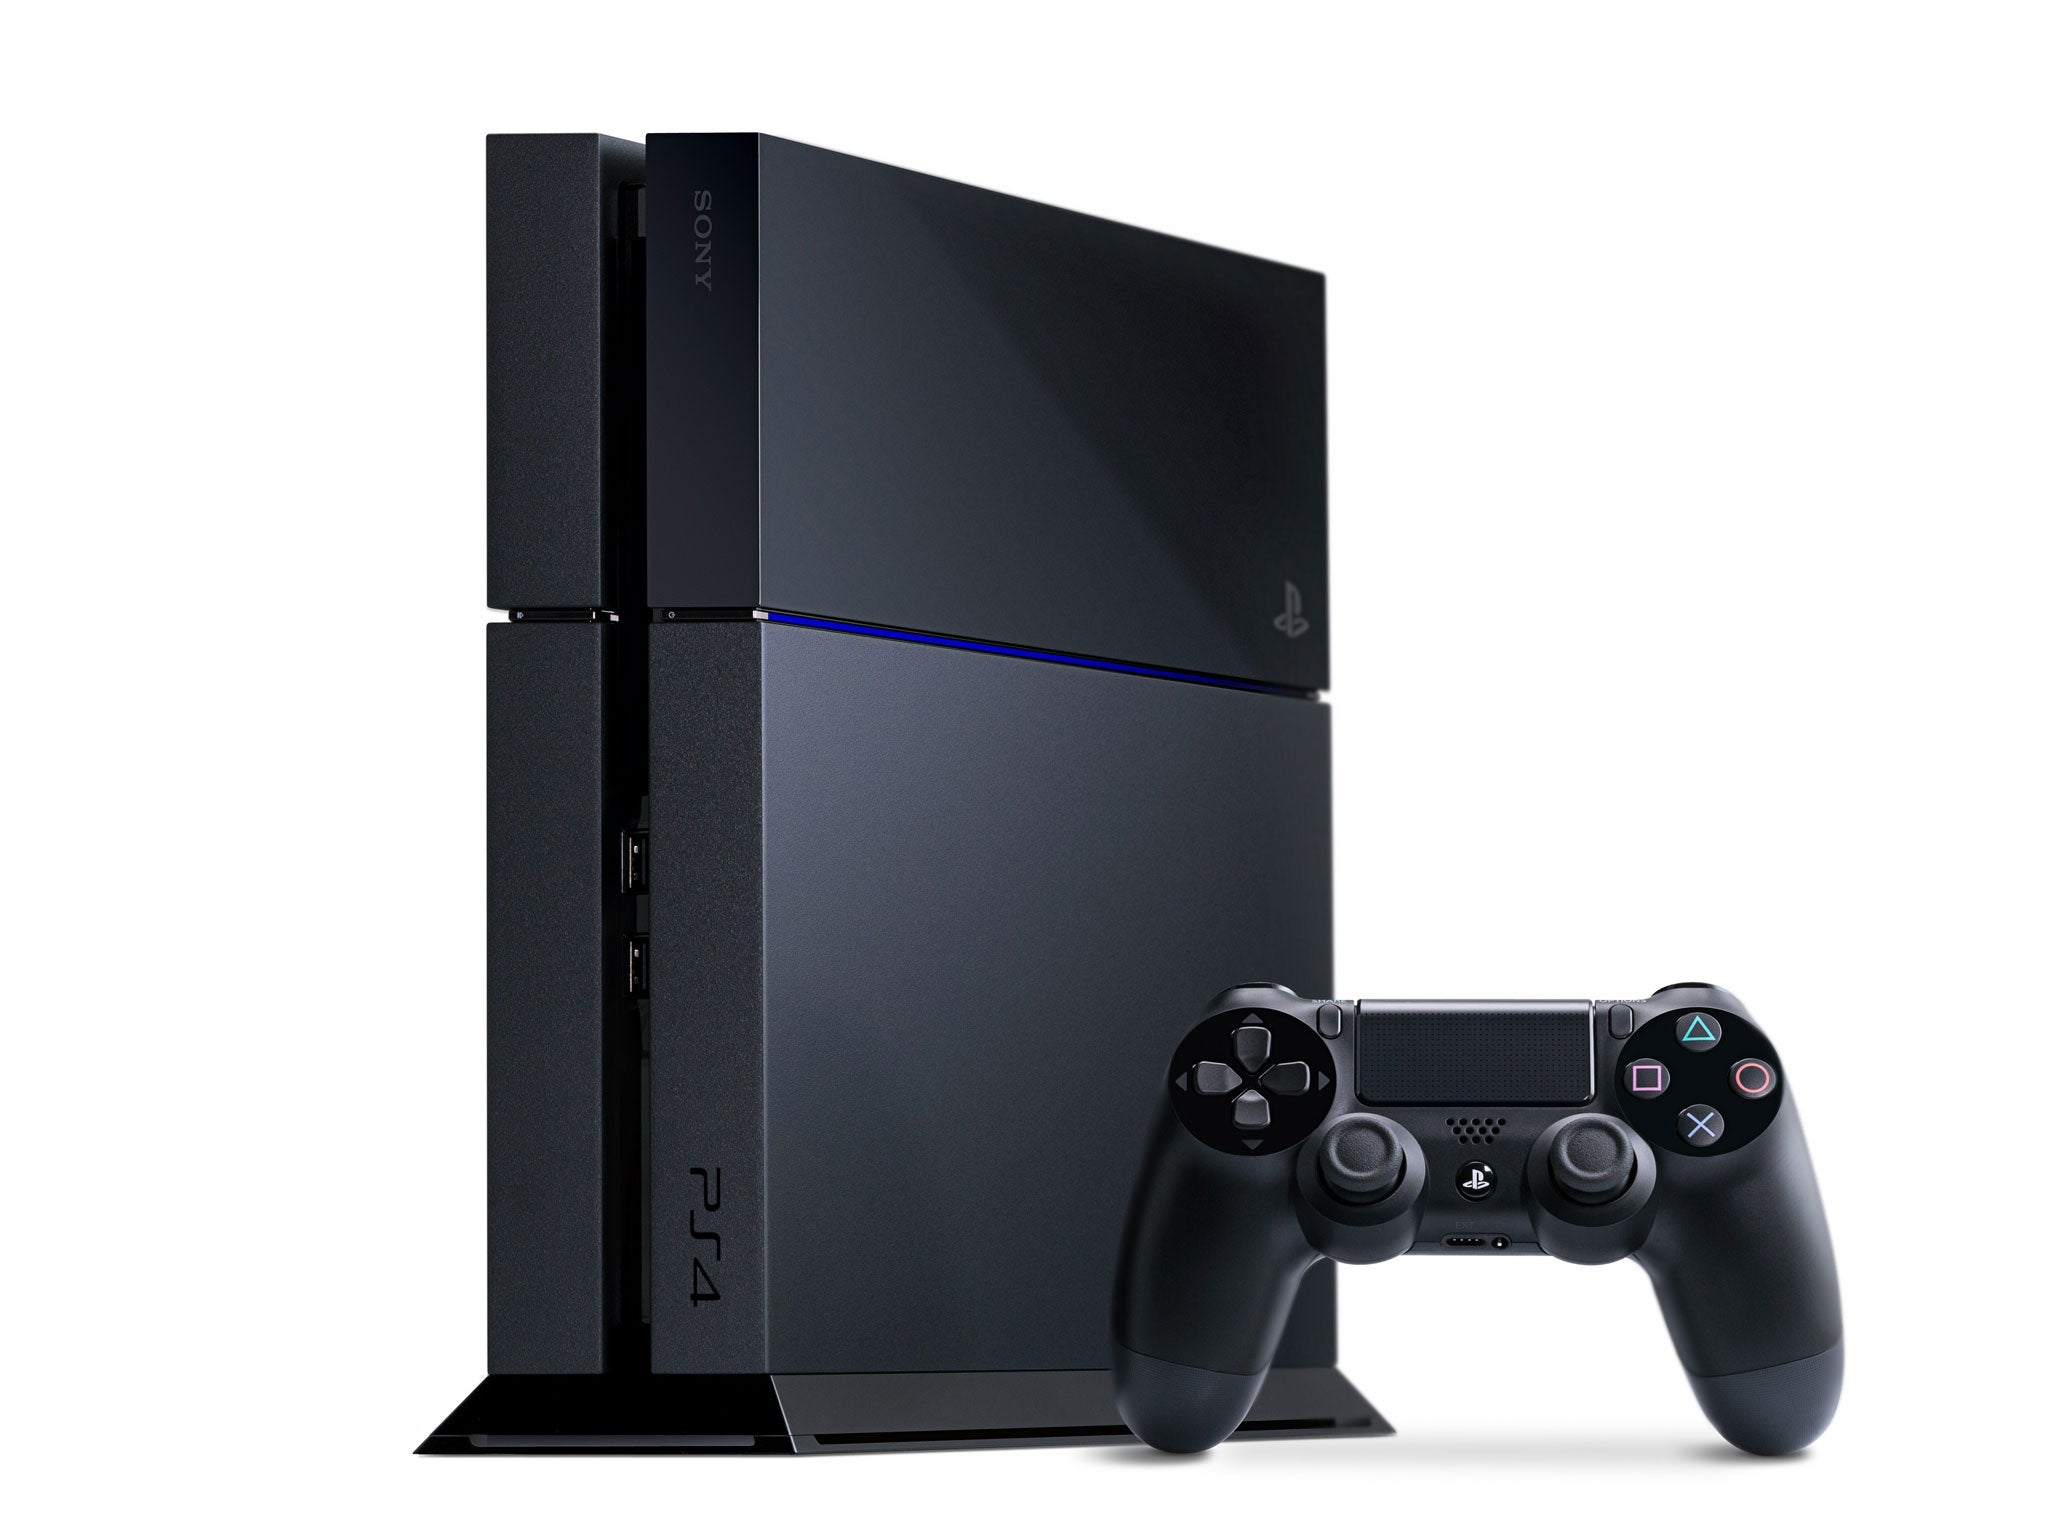 The PS4 went on sale in the UK on 29 November for £349.